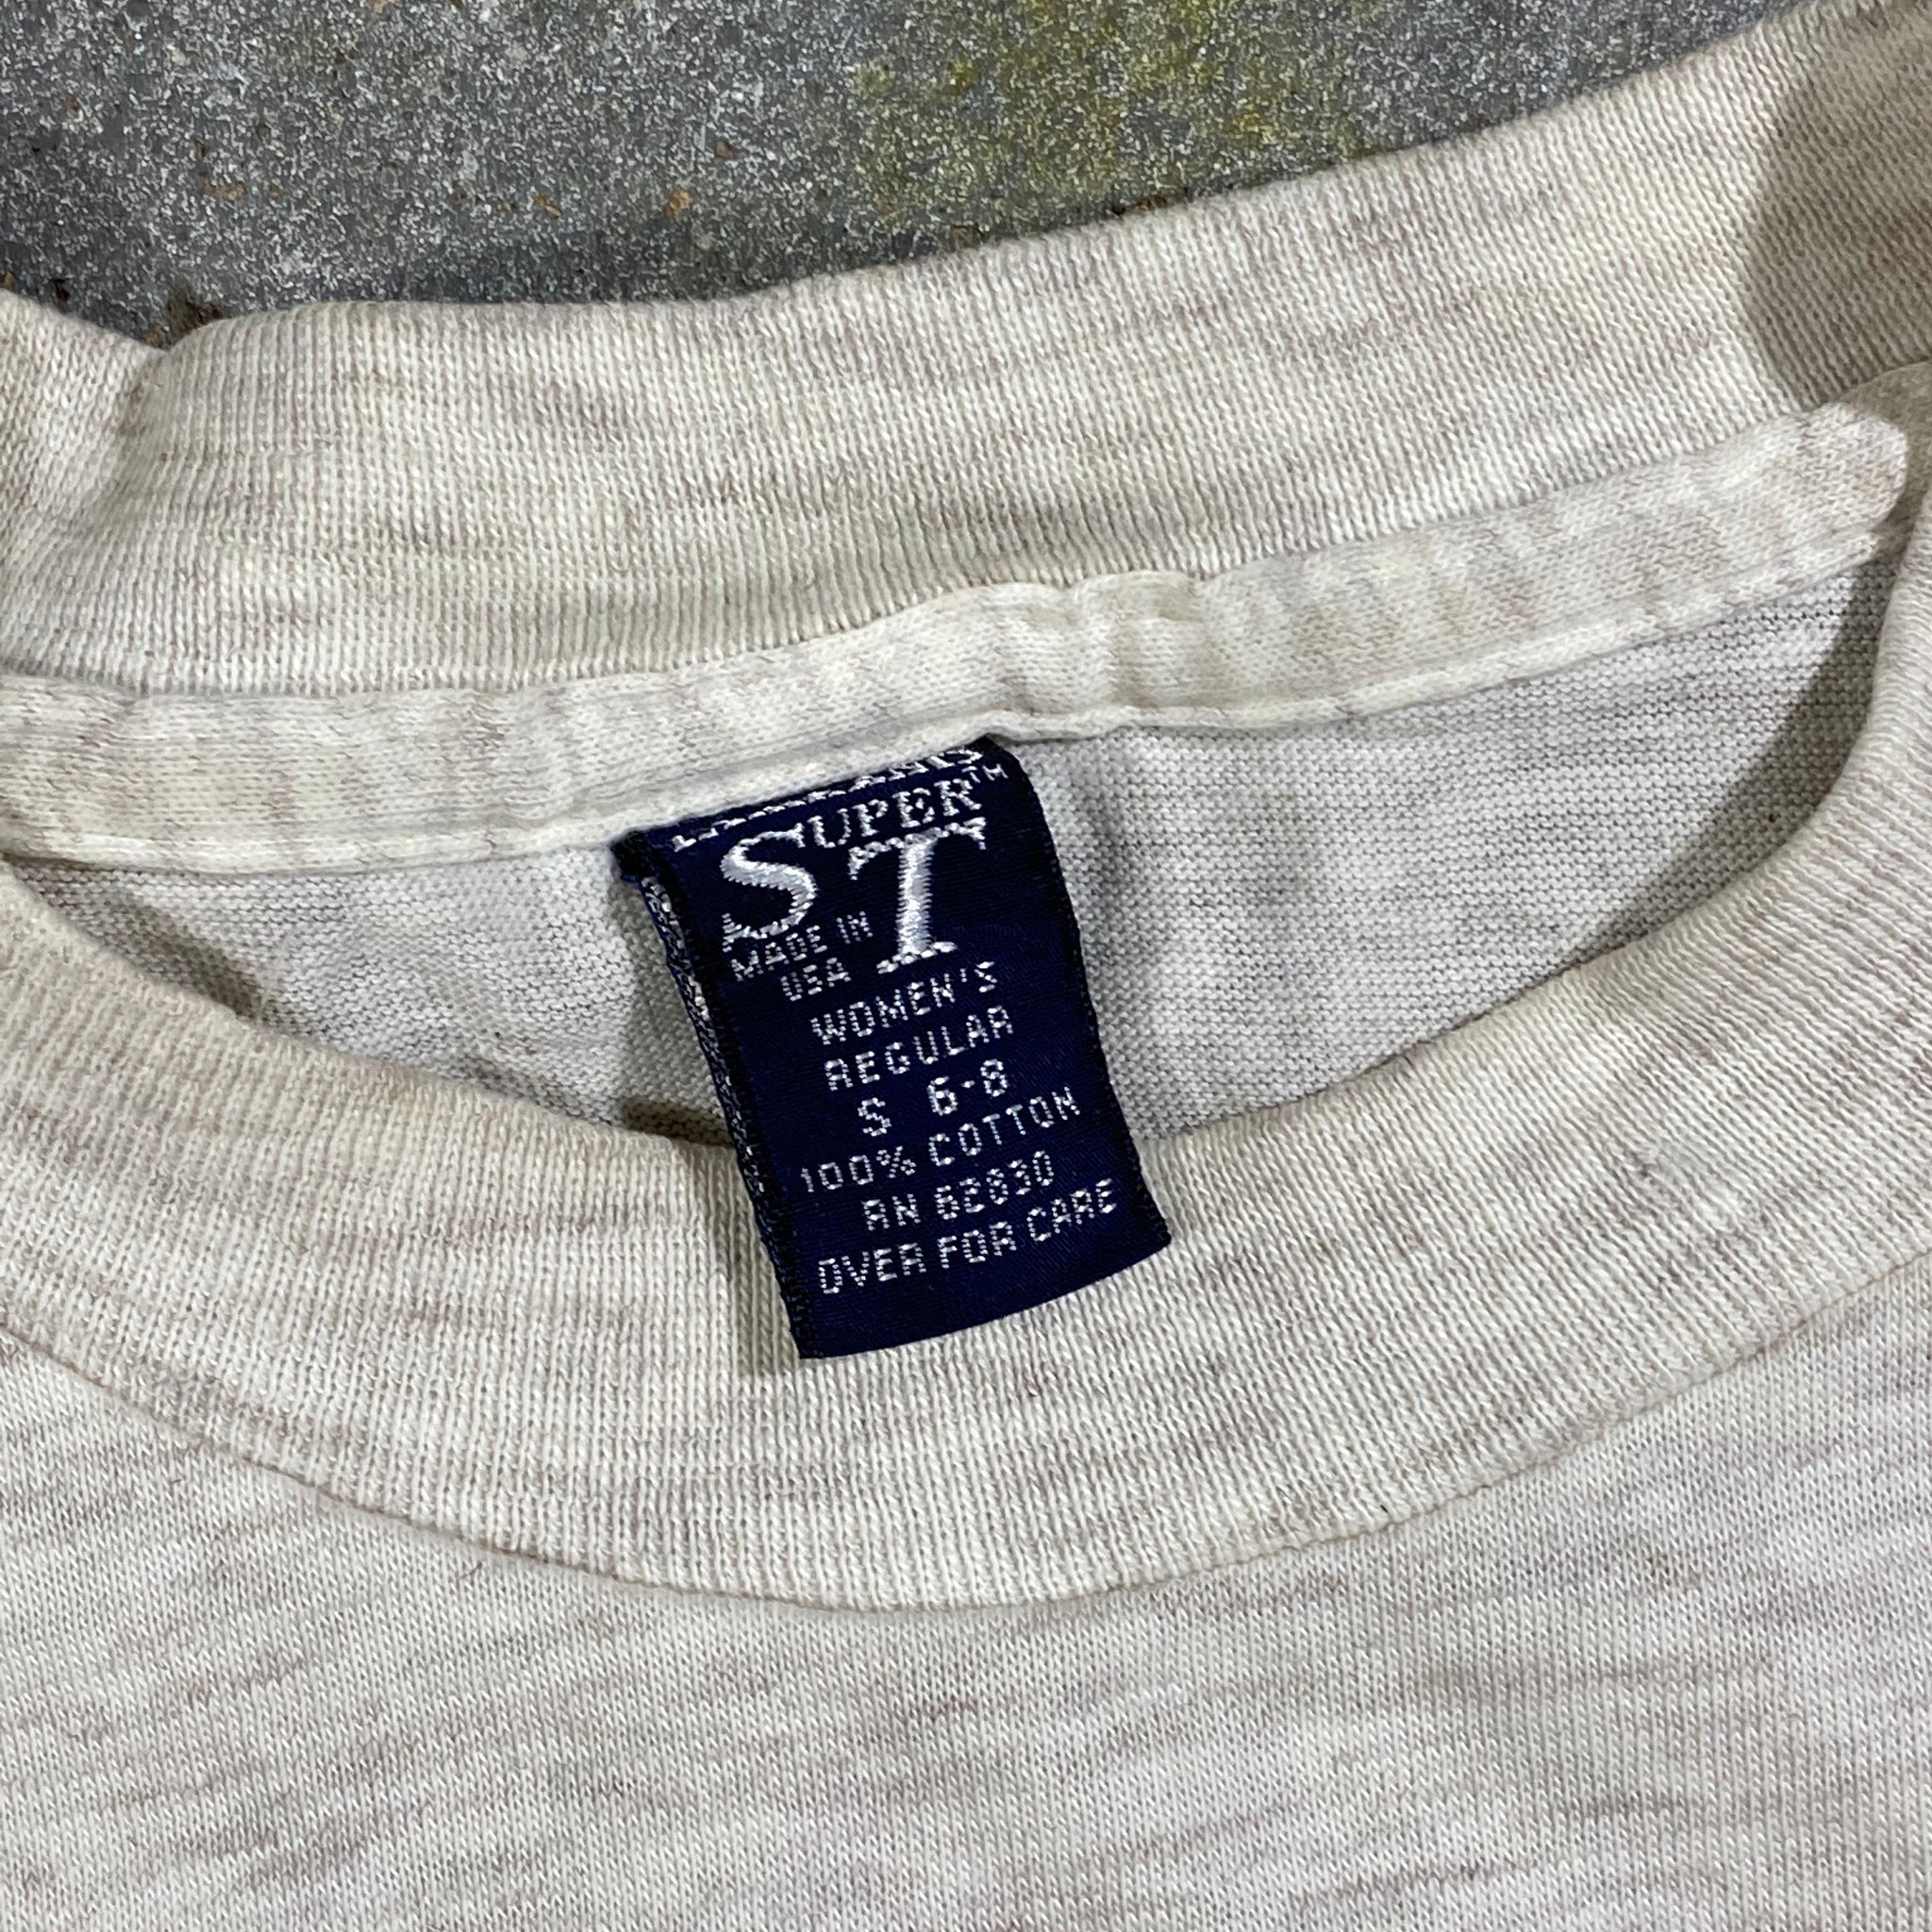 Lands end super tee. long sleeve. pocket. Made in usa🇺🇸. Xs fit